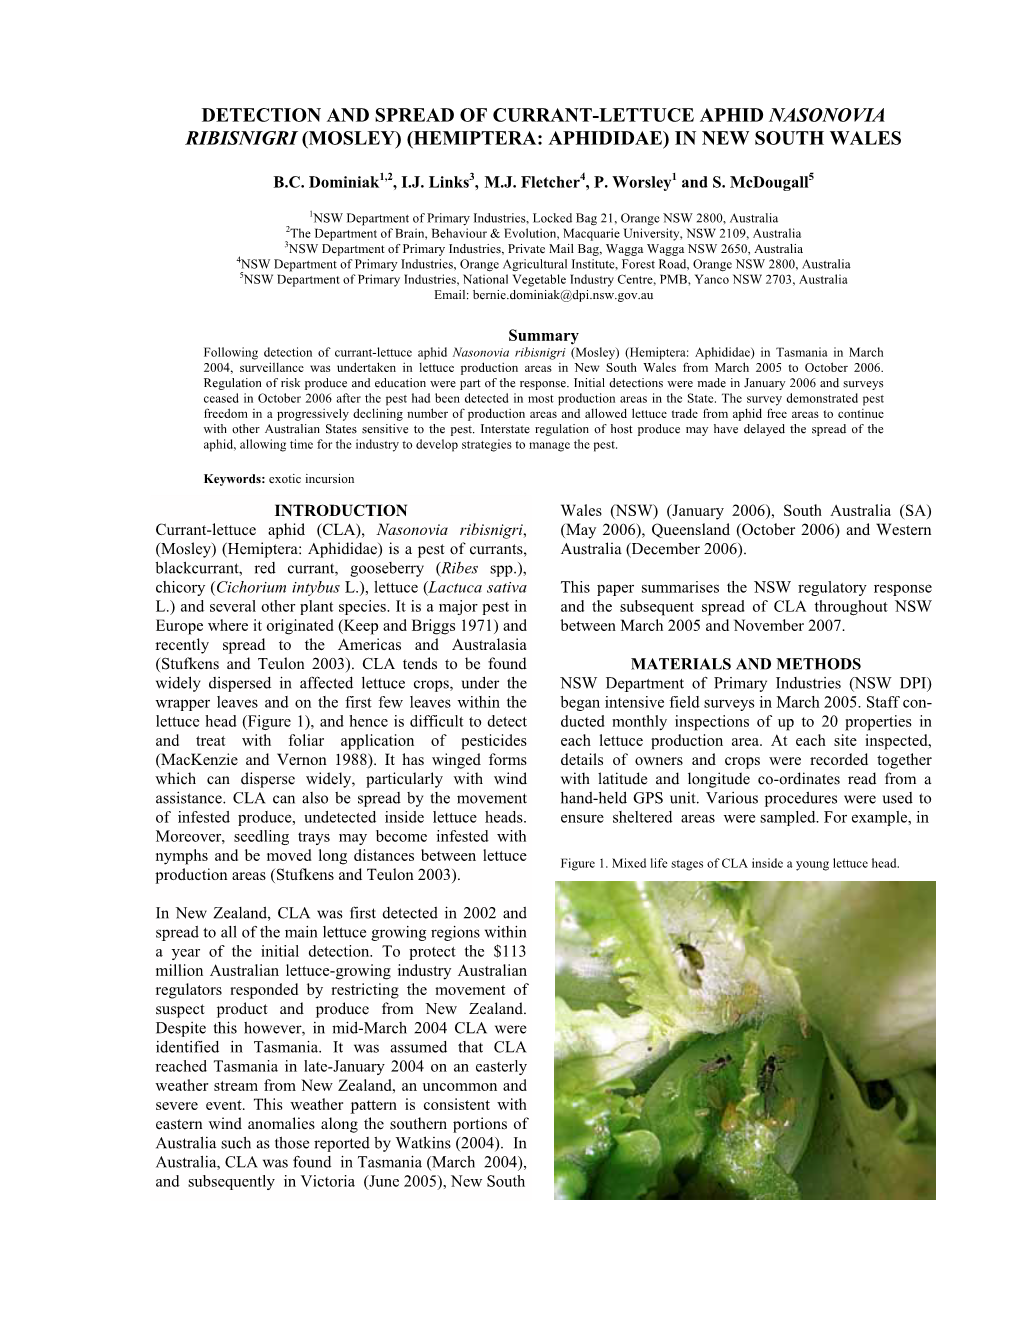 Detection and Spread of Currant-Lettuce Aphid Nasonovia Ribisnigri (Mosley) (Hemiptera: Aphididae) in New South Wales